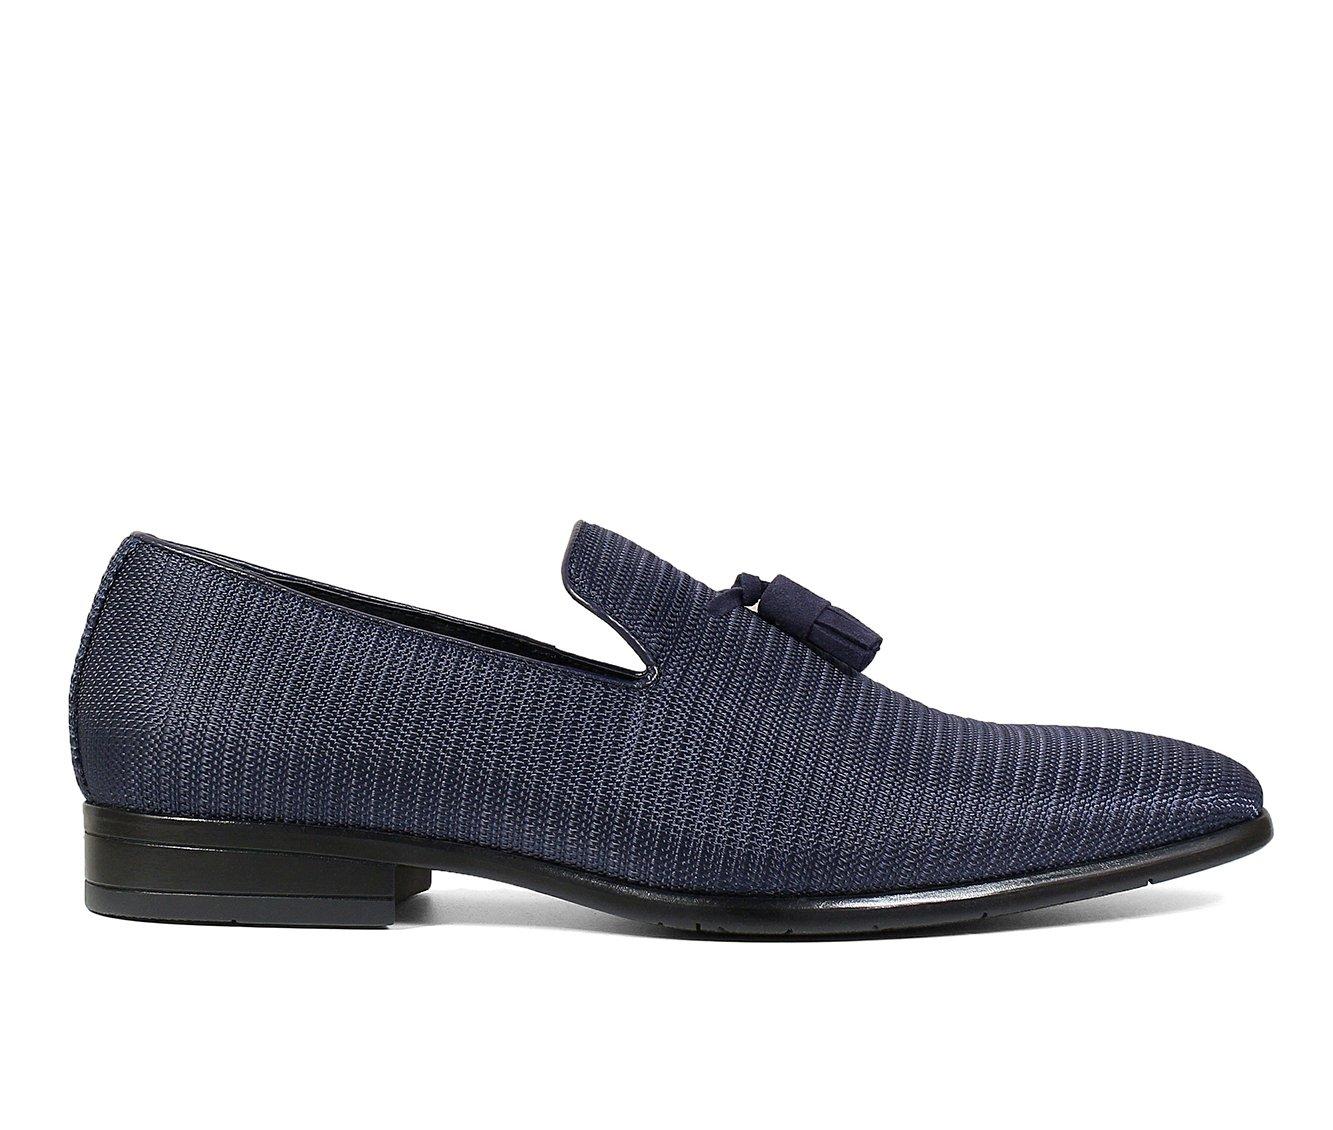 Men's Stacy Adams Tazewell Loafers